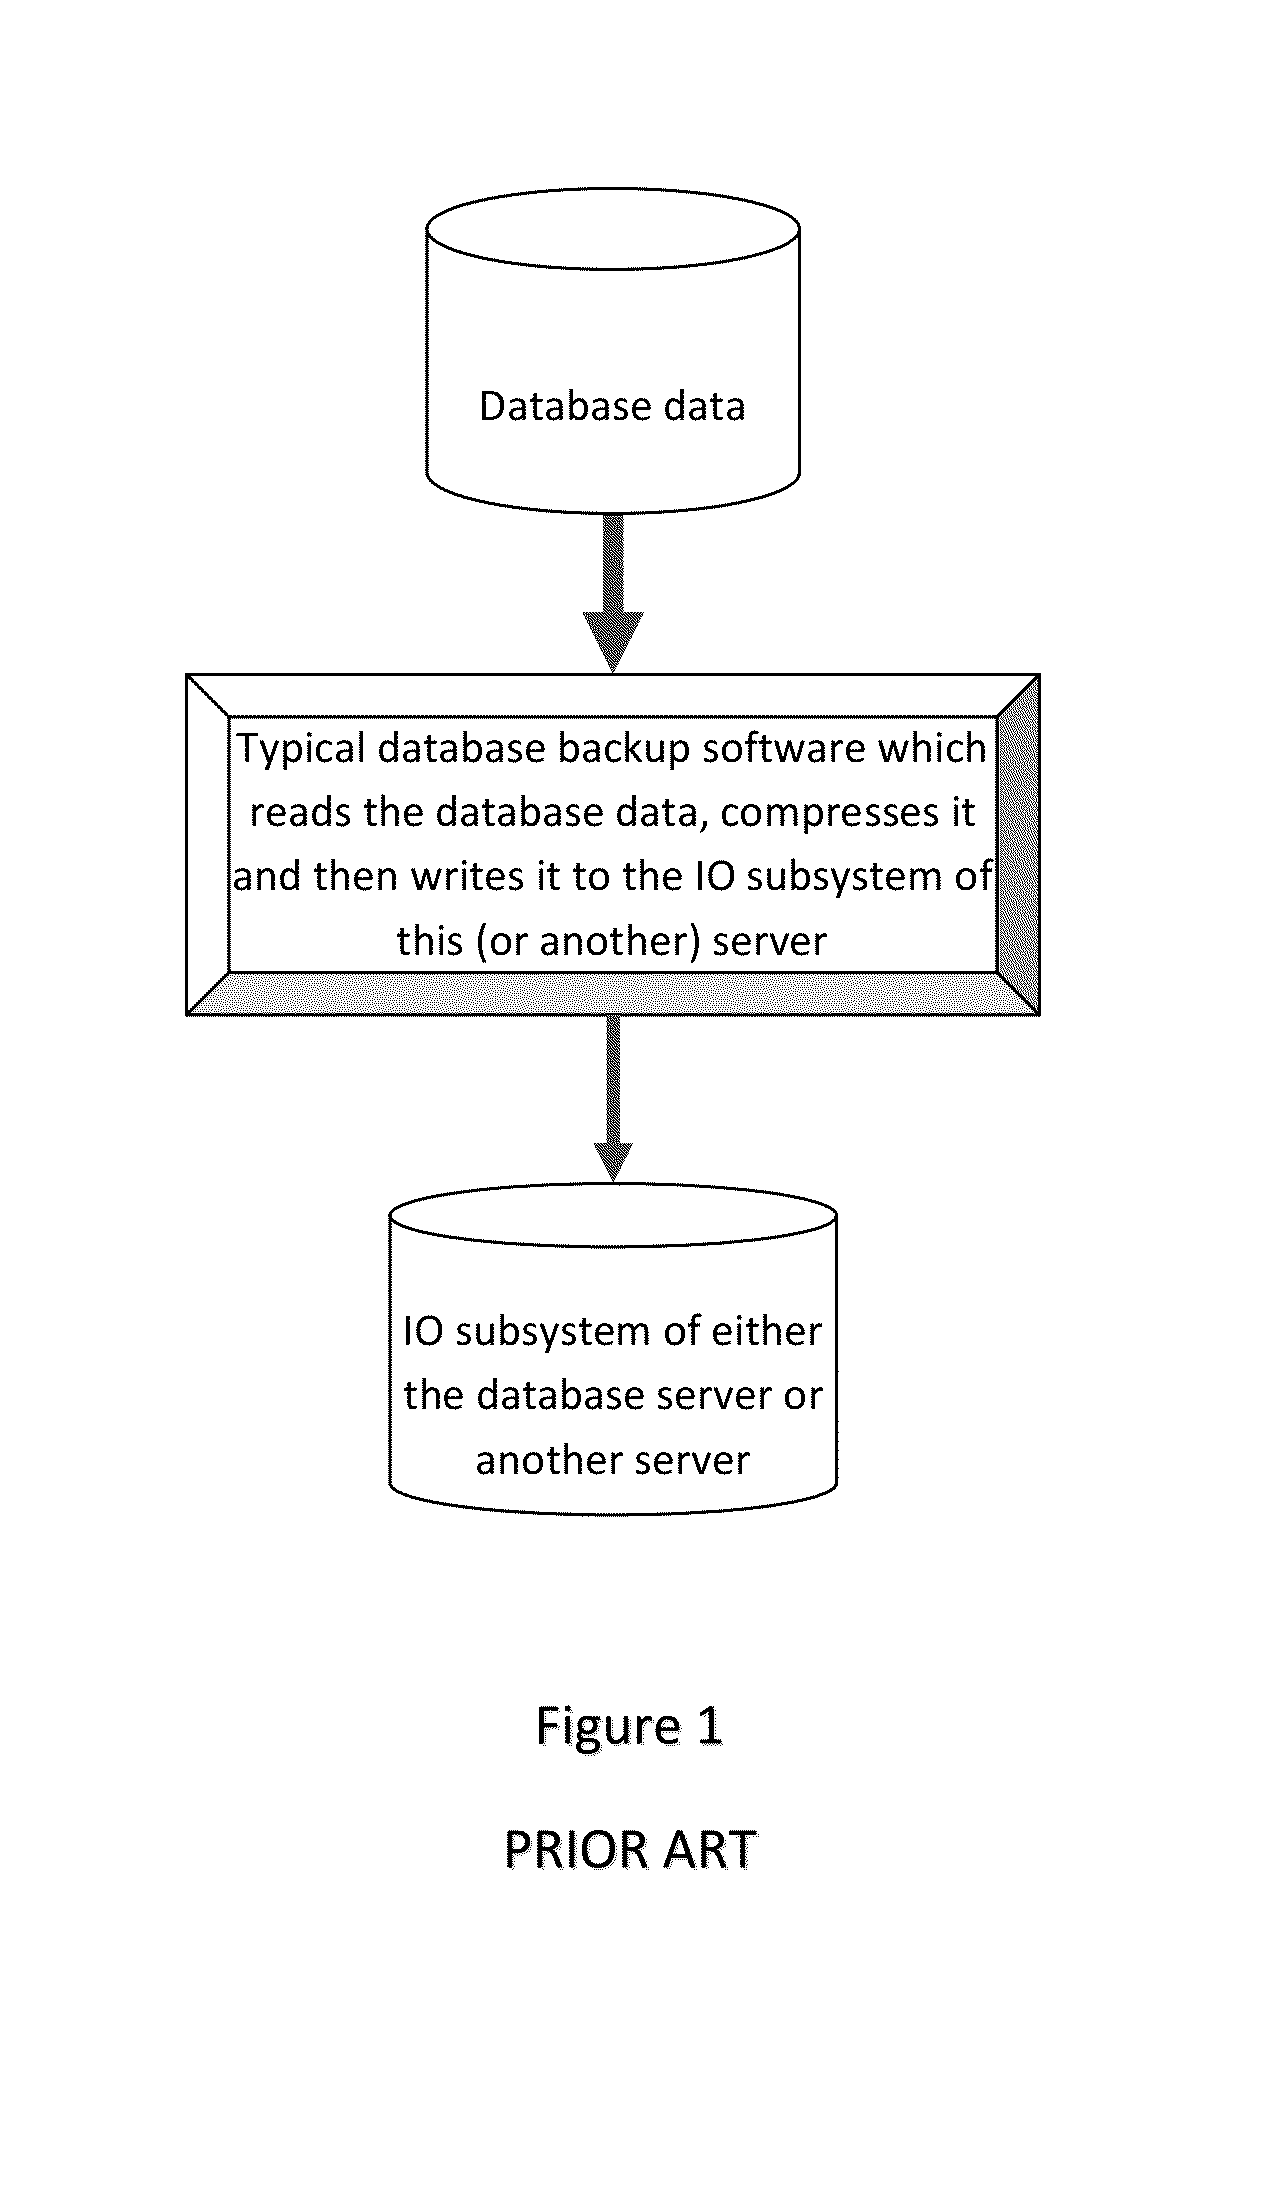 System and method for high speed database backup using rapidly adjusted dynamic compression ratios controlled by a feedback loop